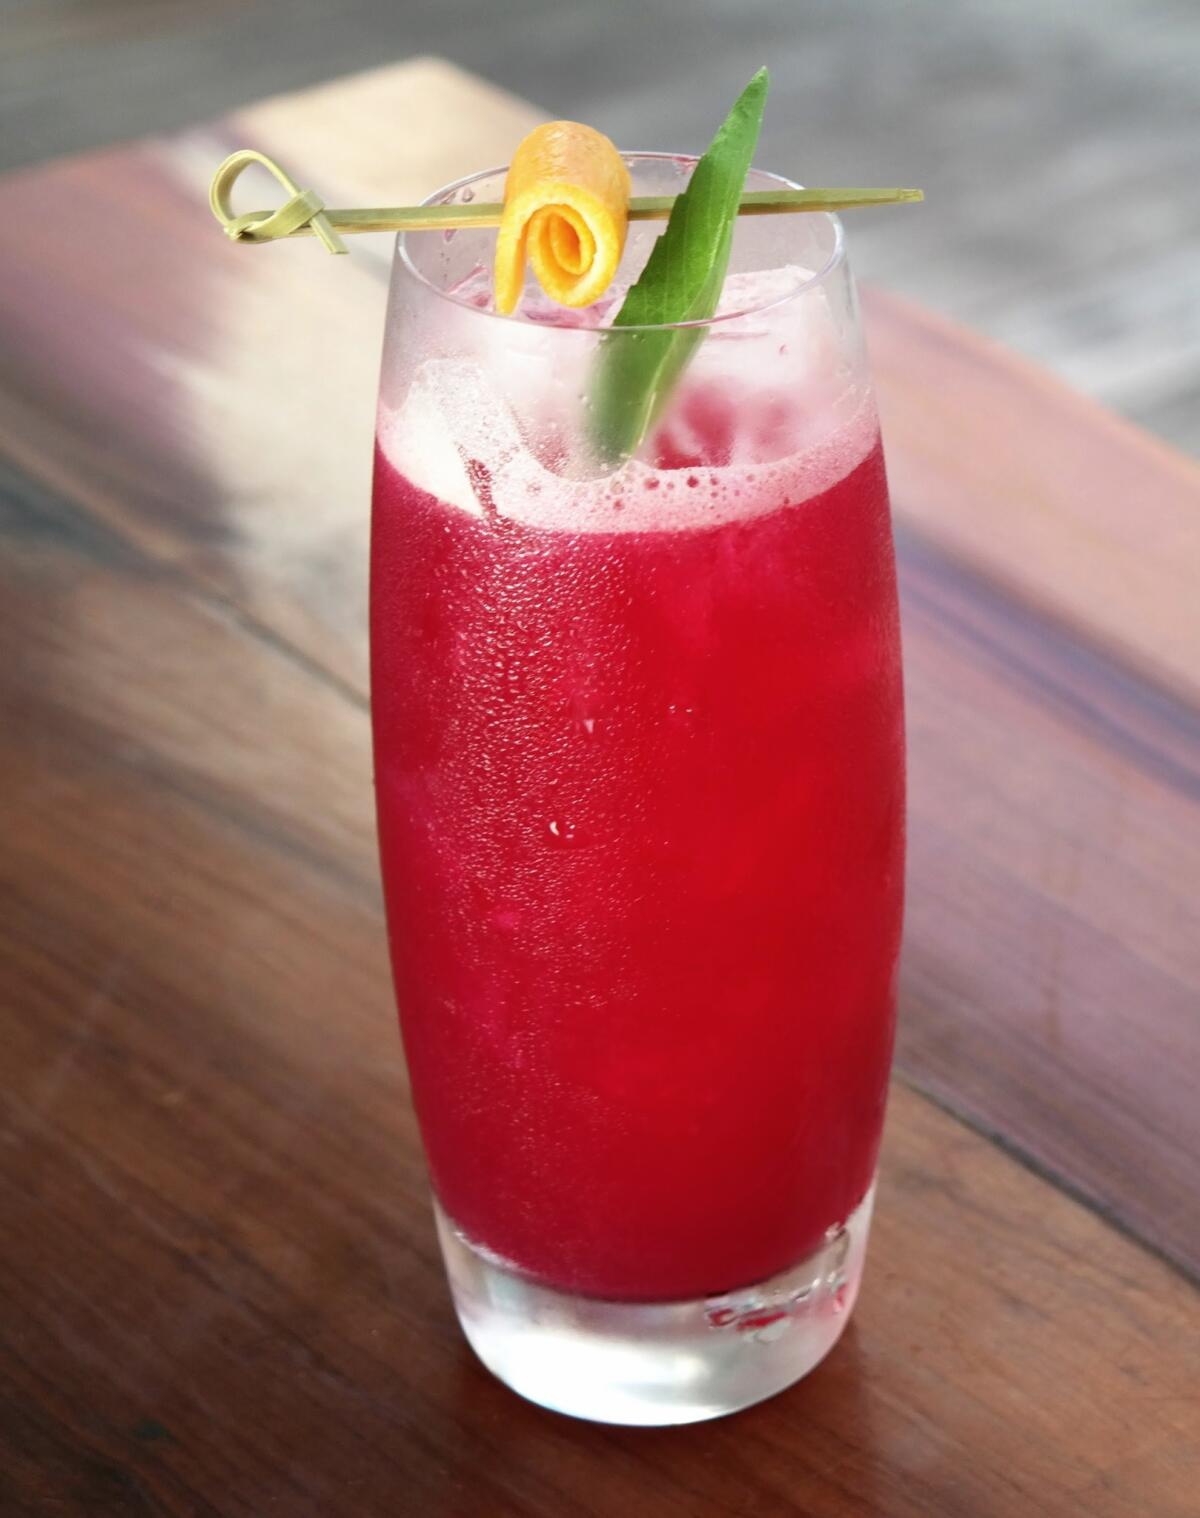 In an effort to reduce pollution, drinks at The Modern Honolulu no longer are served with plastic straws. The cocktails include Don't Skip a Beat, which features freshly squeezed beets and bourbon.